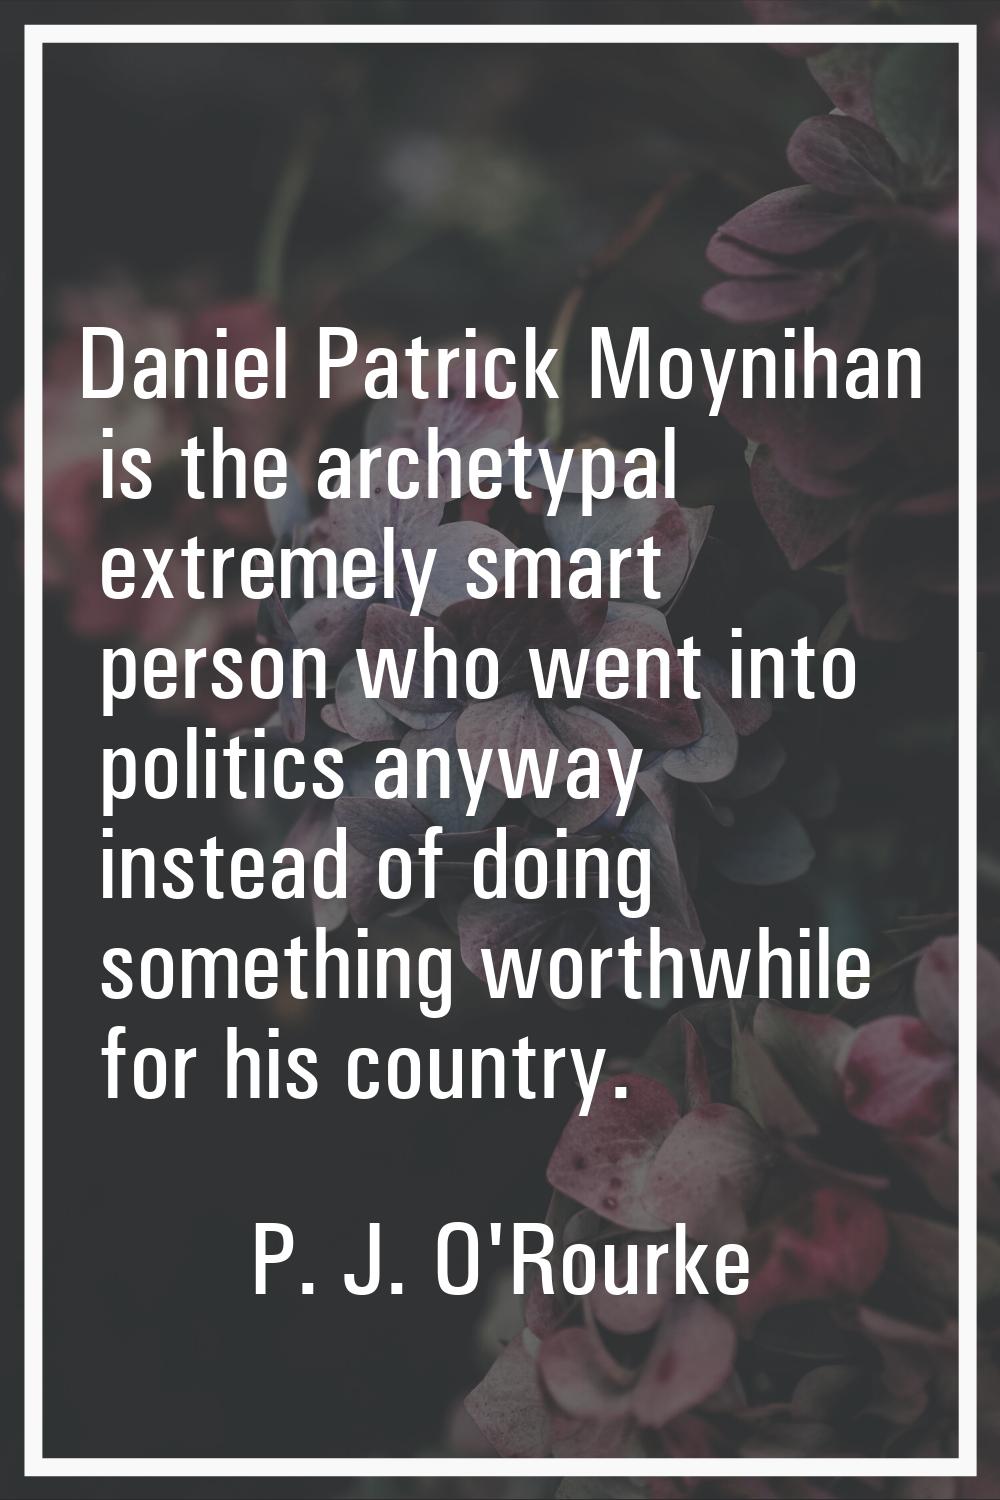 Daniel Patrick Moynihan is the archetypal extremely smart person who went into politics anyway inst